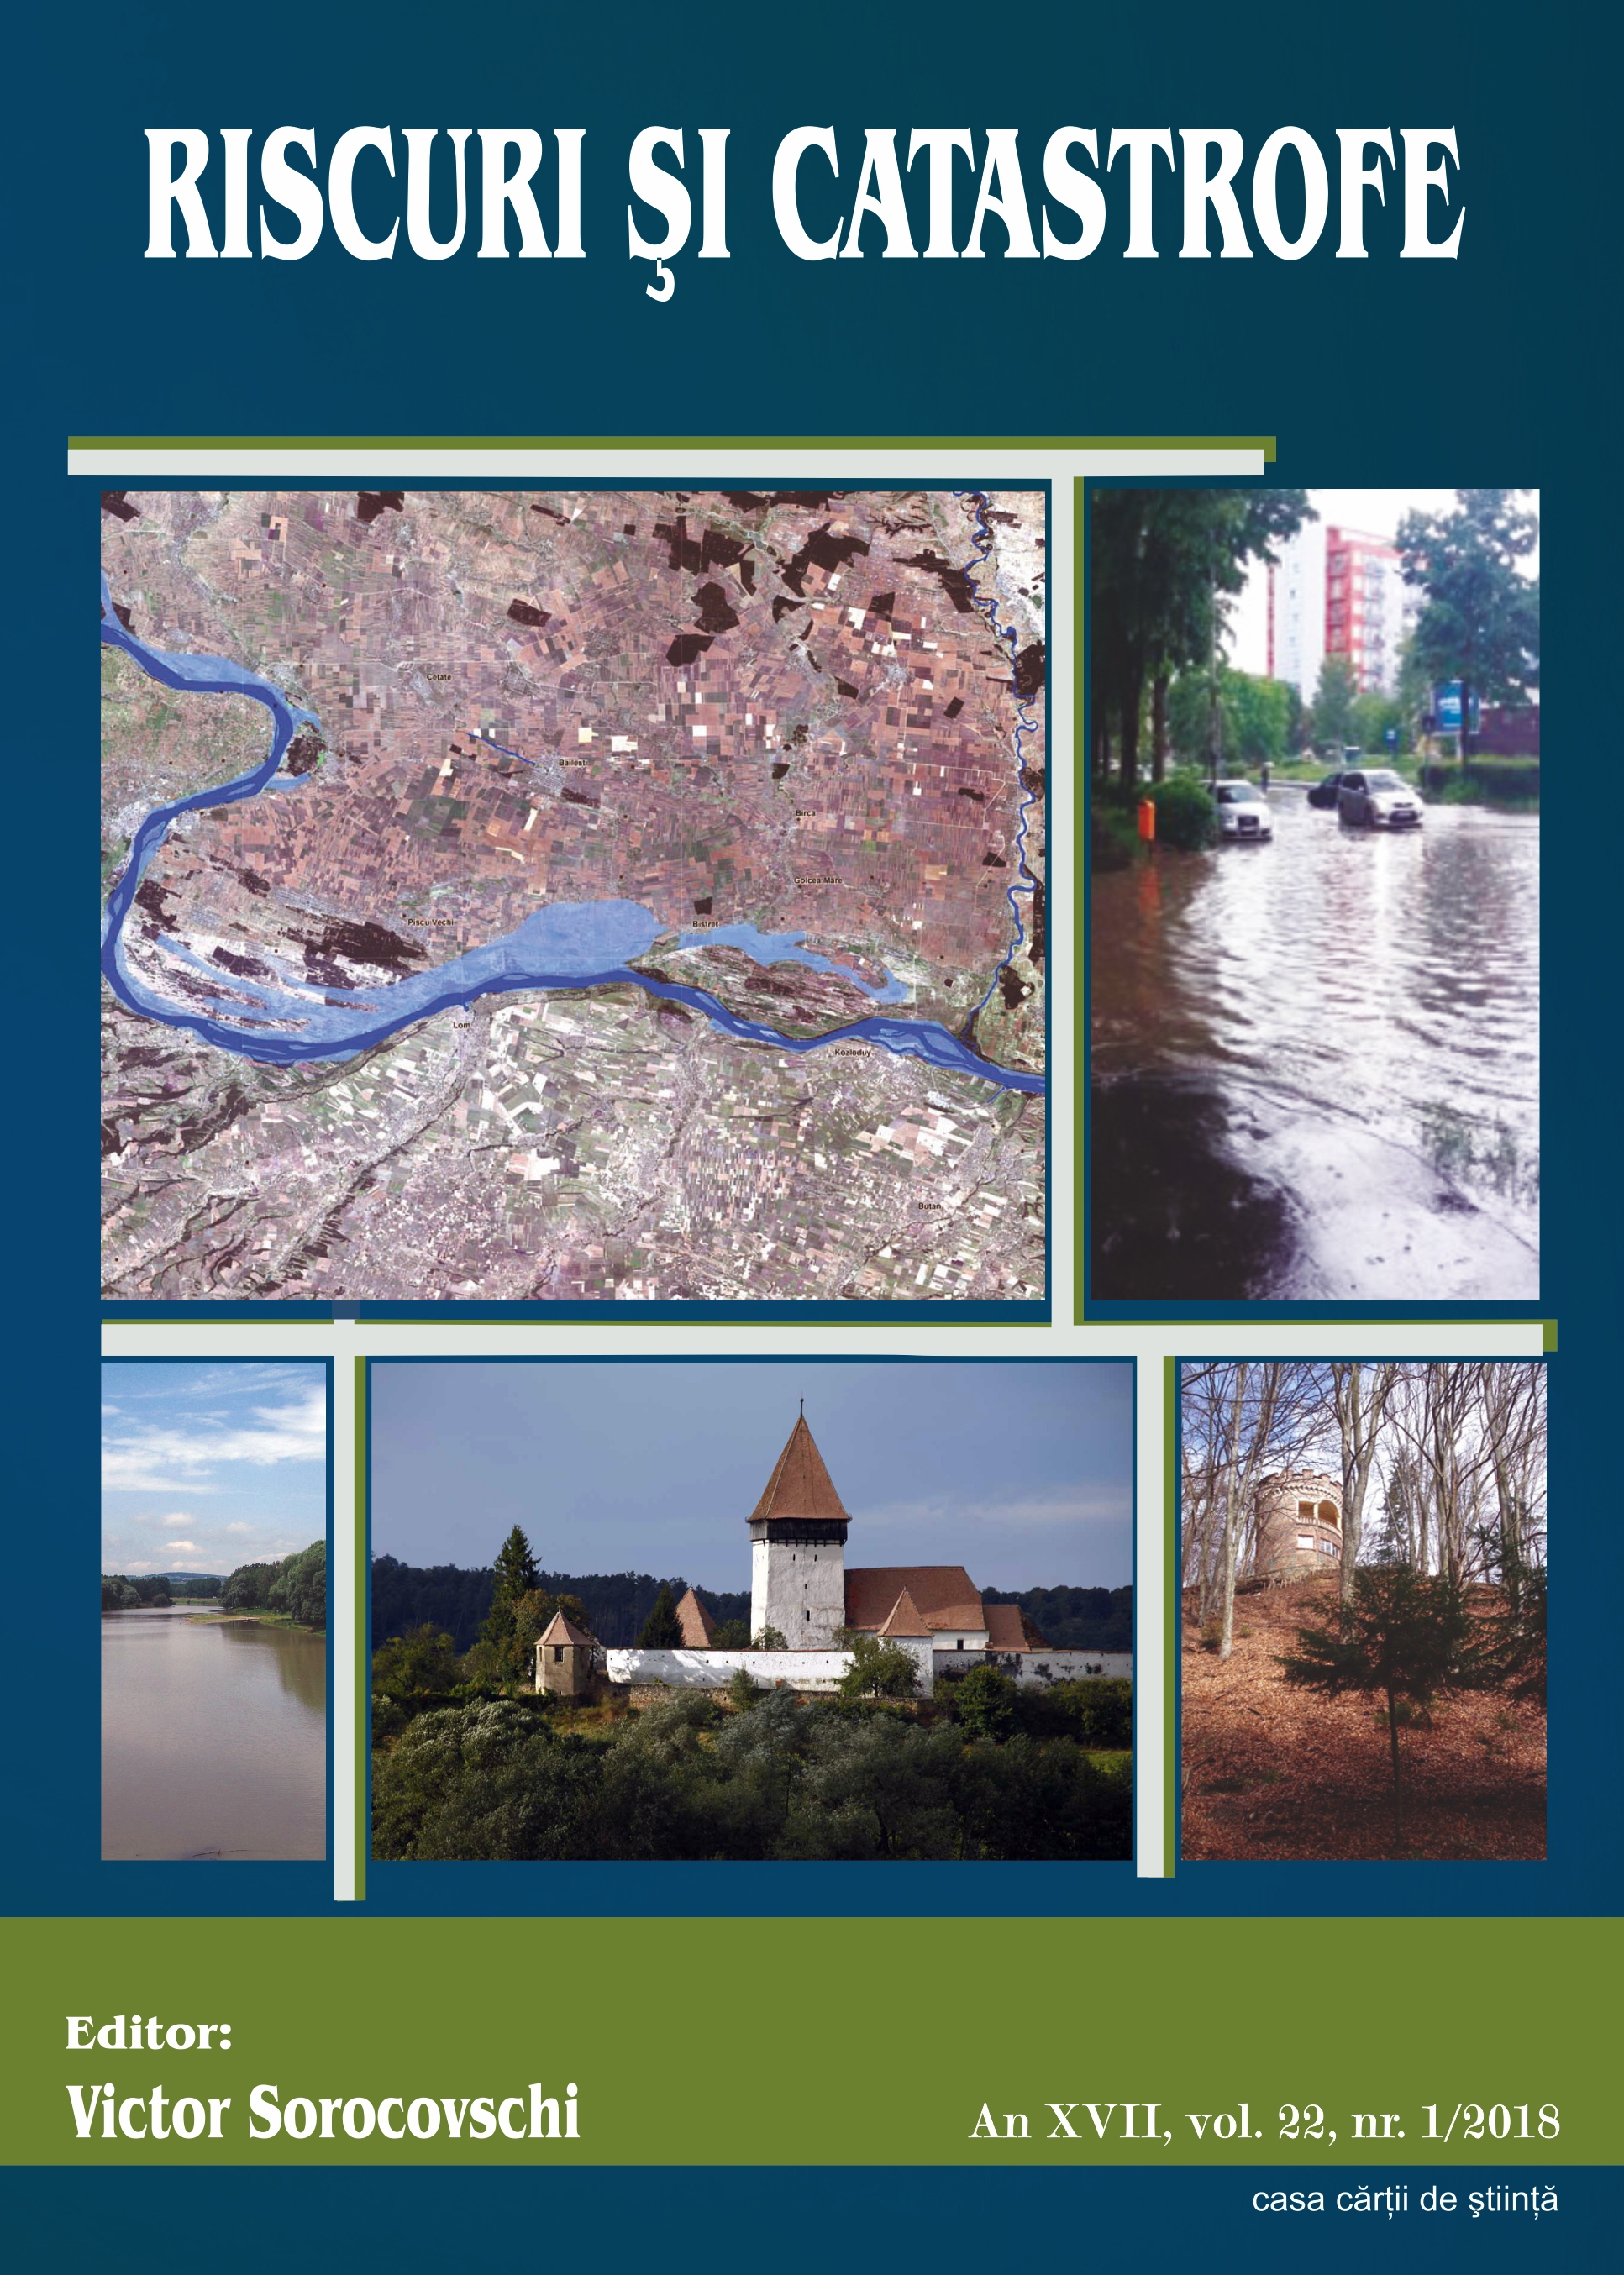 THE DANUBE FLOODPLAIN IN THE PONTIC SECTOR–ECOSYSTEM SERVICES, ANTHROPIC MODIFICATIONS AND MANAGEMENT